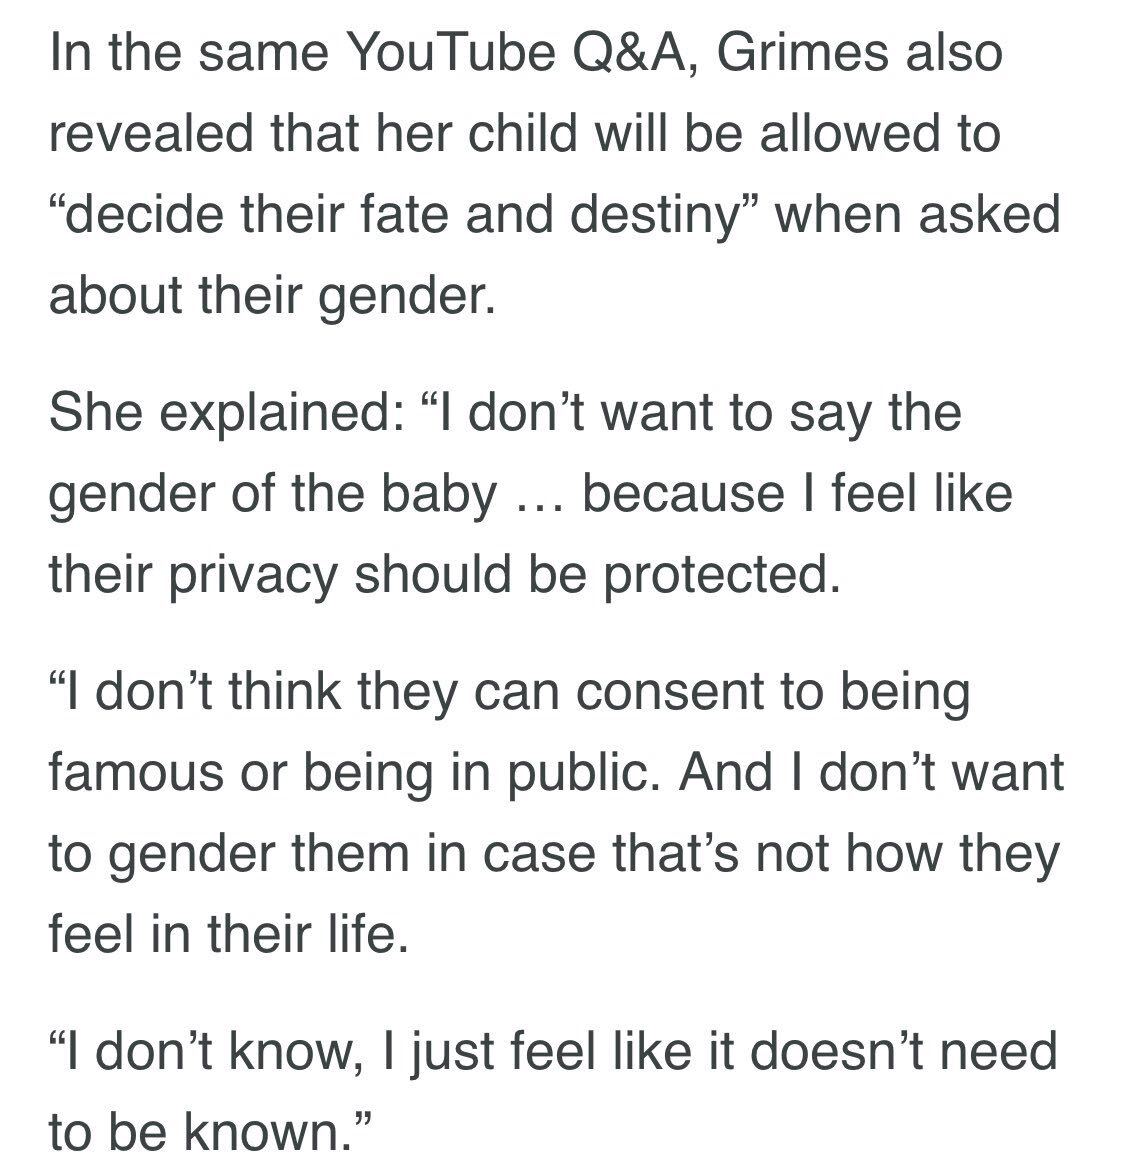 angle - In the same YouTube Q&A, Grimes also revealed that her child will be allowed to decide their fate and destiny" when asked about their gender. She explained I don't want to say the gender of the baby ... because I feel their privacy should be prote